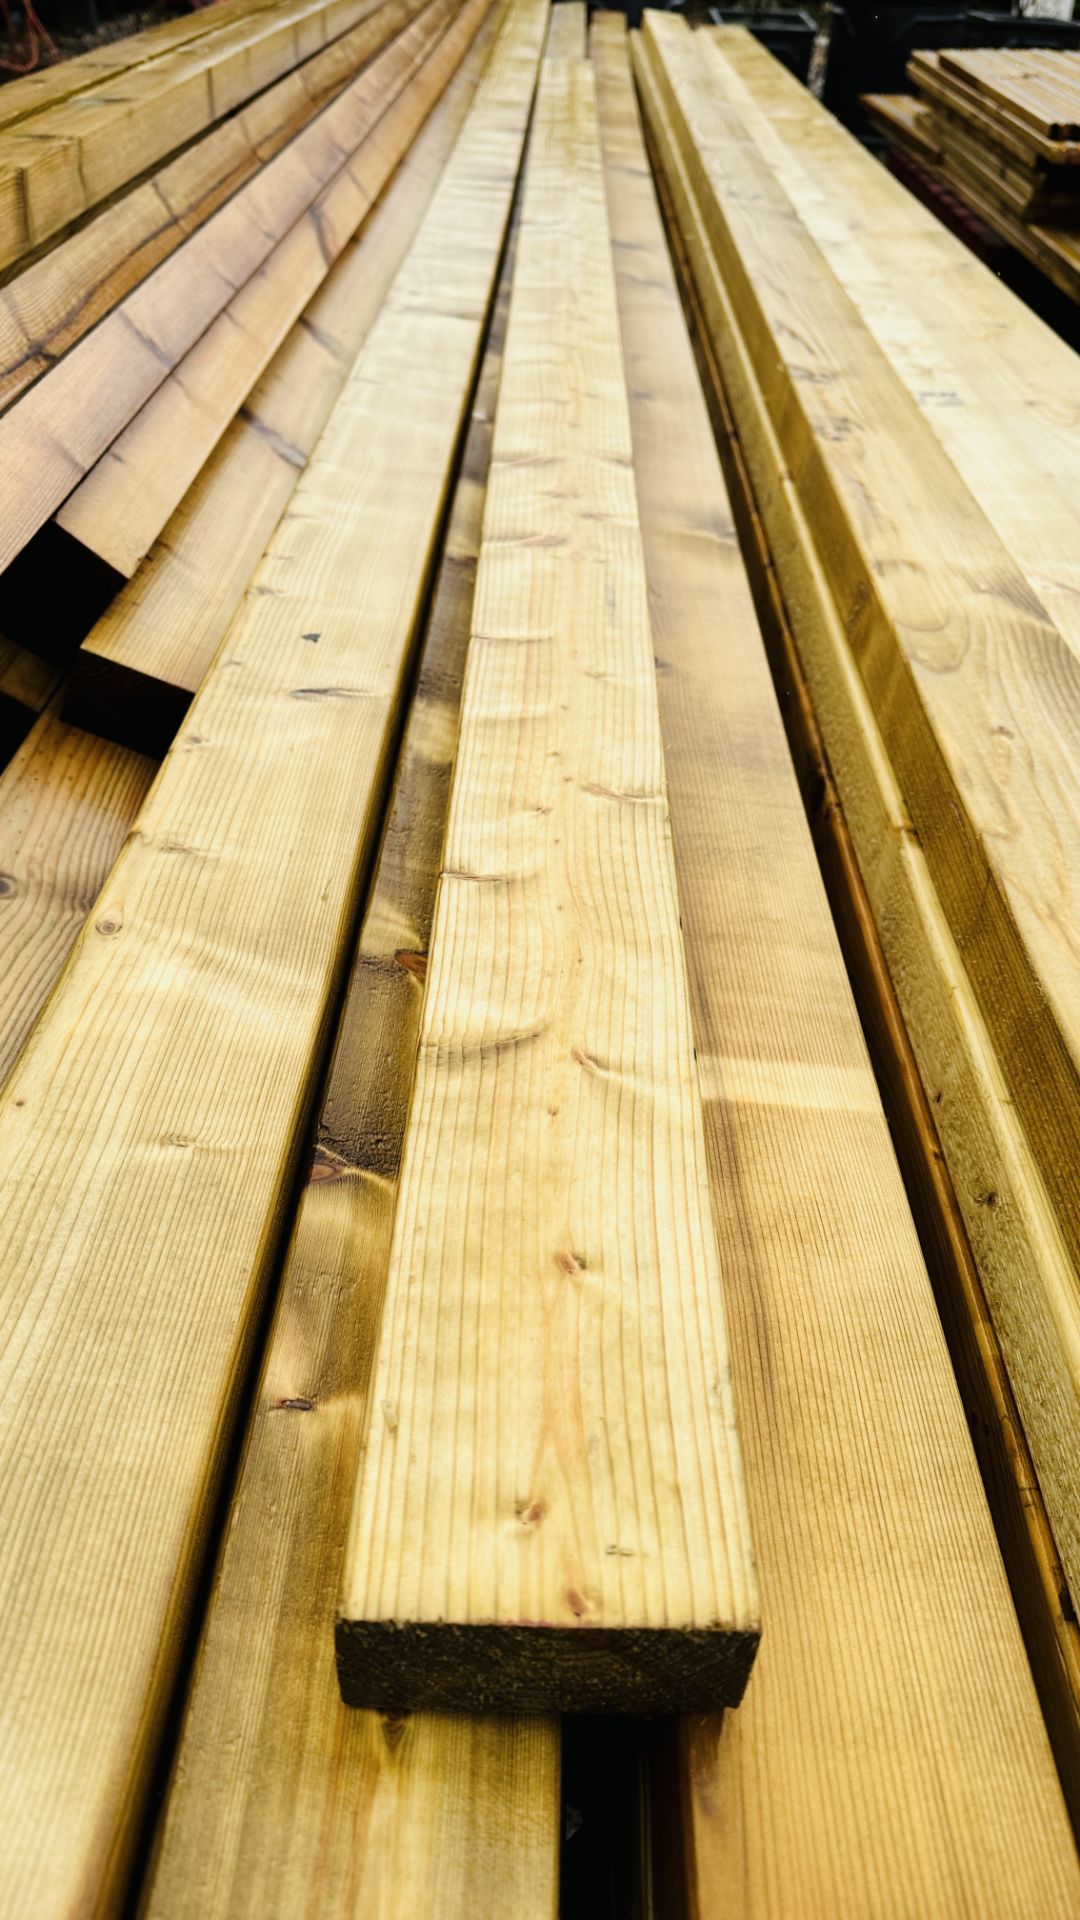 21 X APPROX 4.1M LENGTHS OF 100MM X 45MM PLANED TANALISED TIMBER. - Image 7 of 7